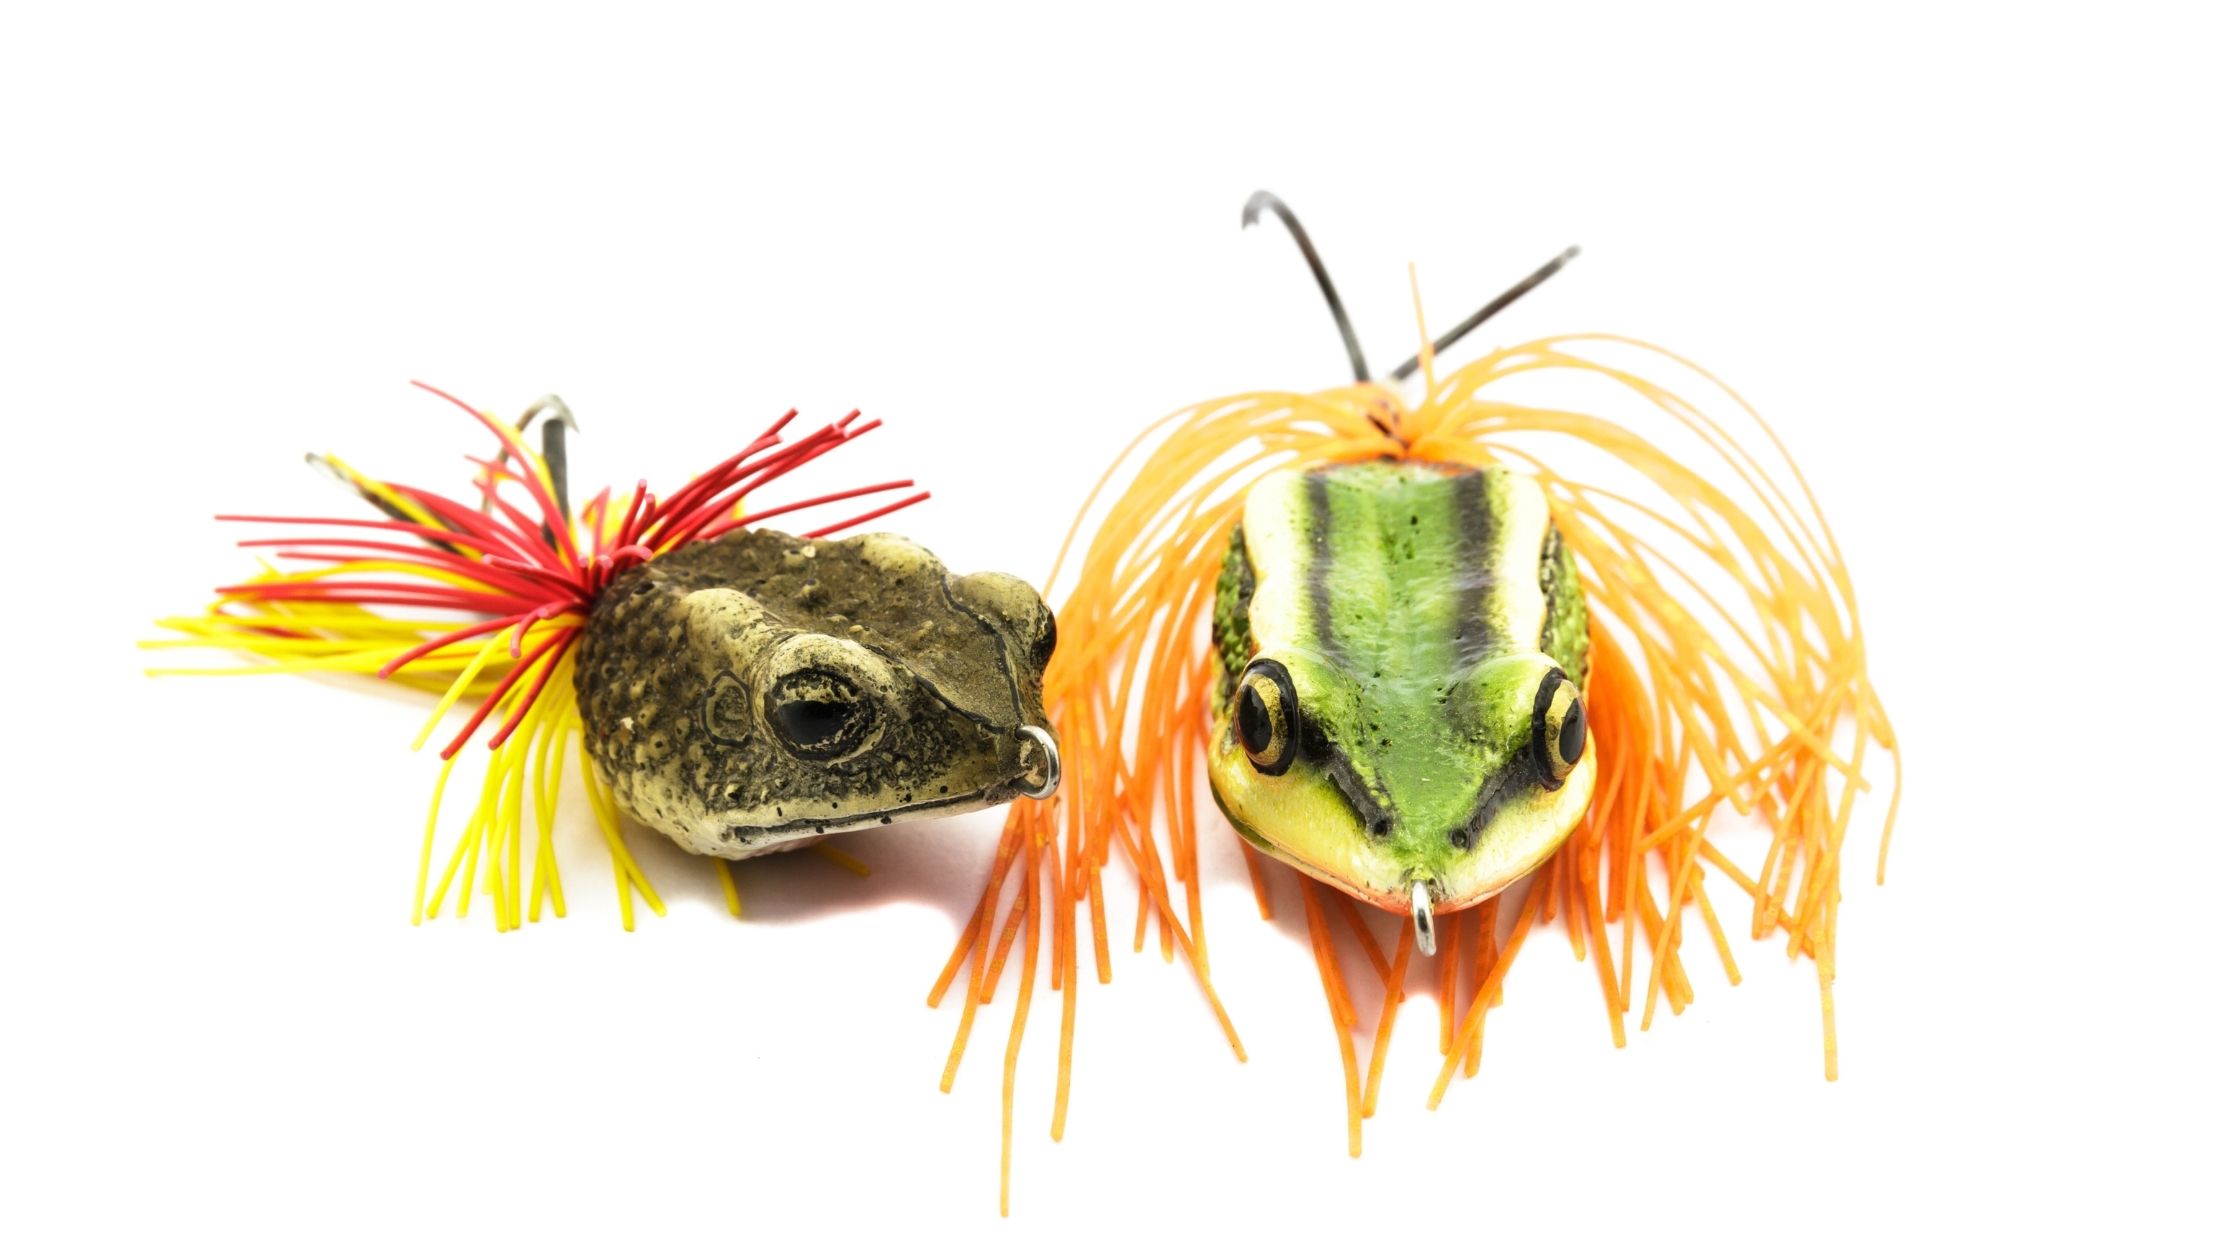 Types of Fishing Bait: Crickets